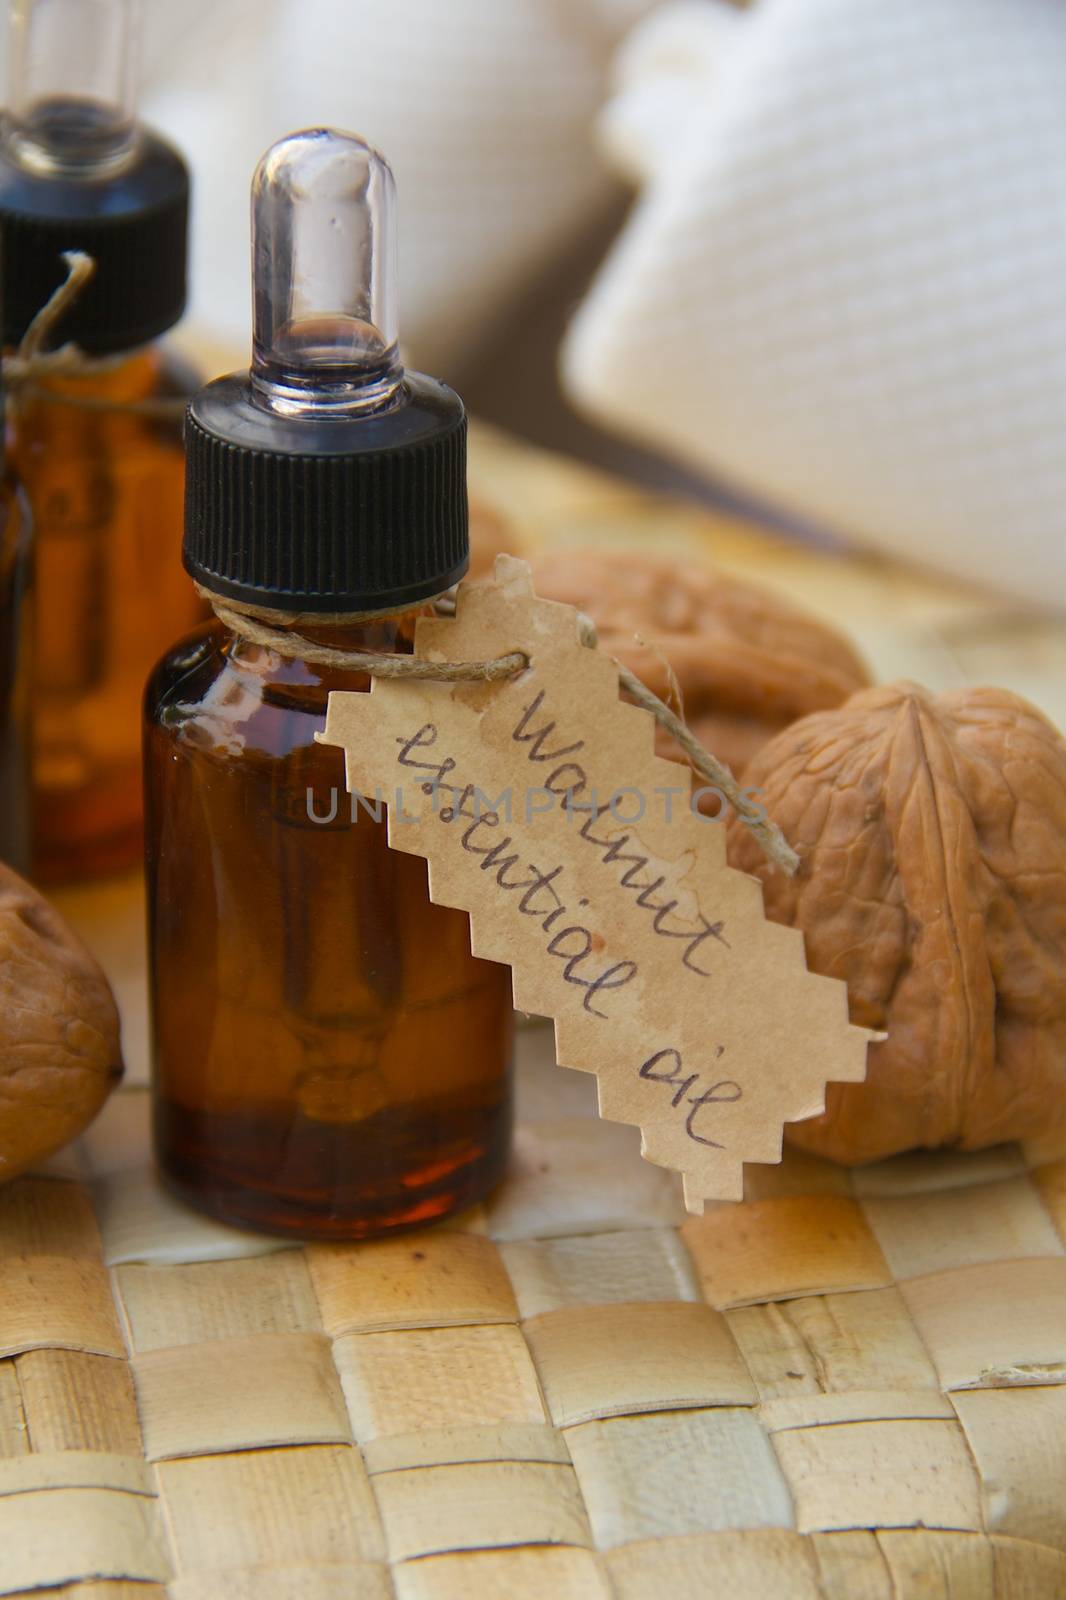 Bottle of walnut essential oil on the woven surface. Walnuts in the background